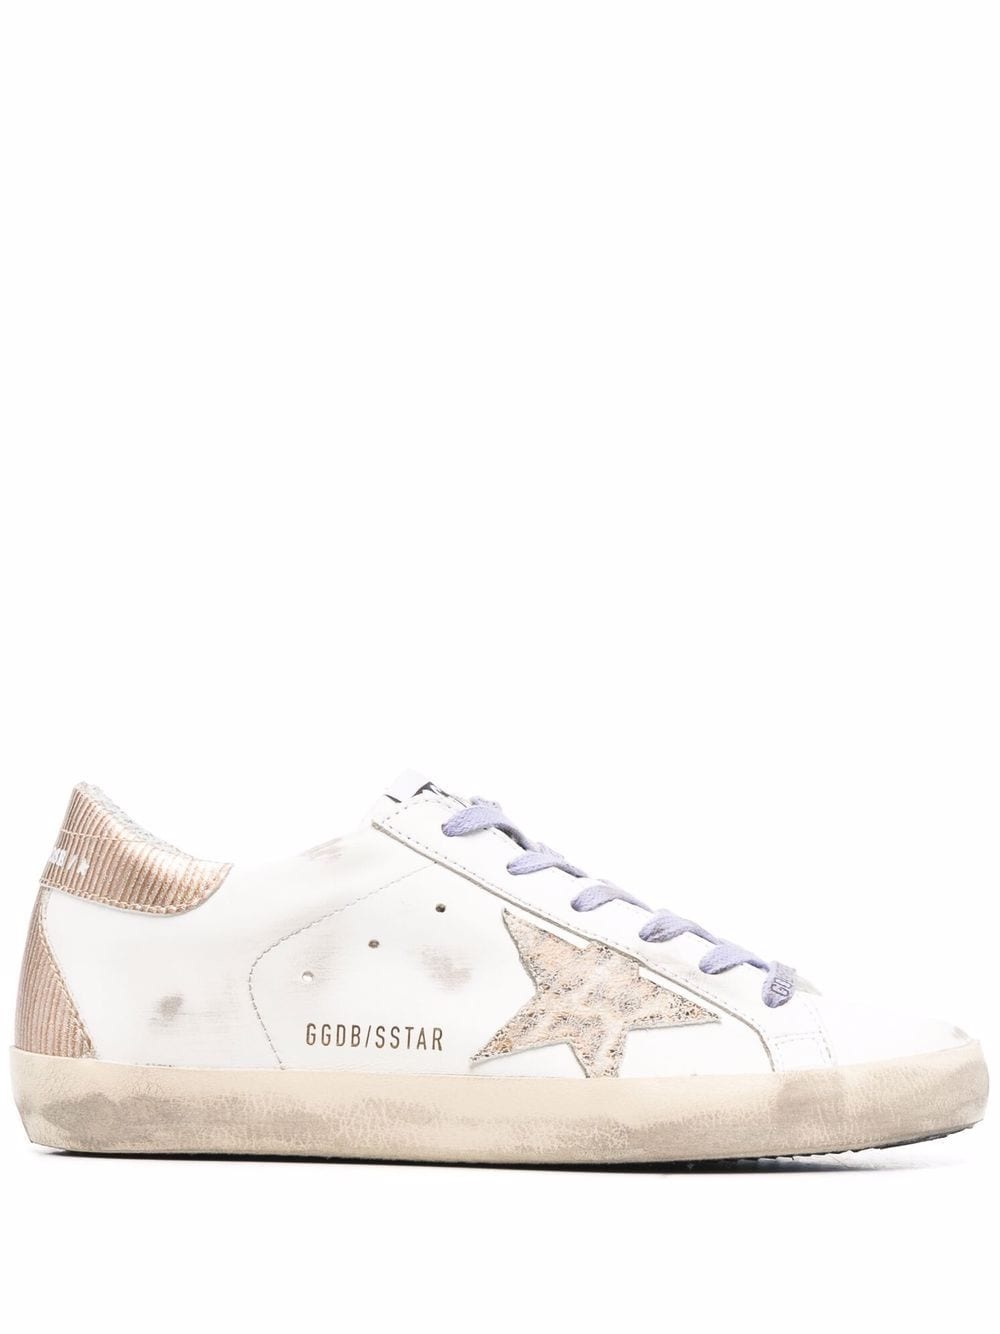 Golden Goose Deluxe Brand Shoes White Woman - 1